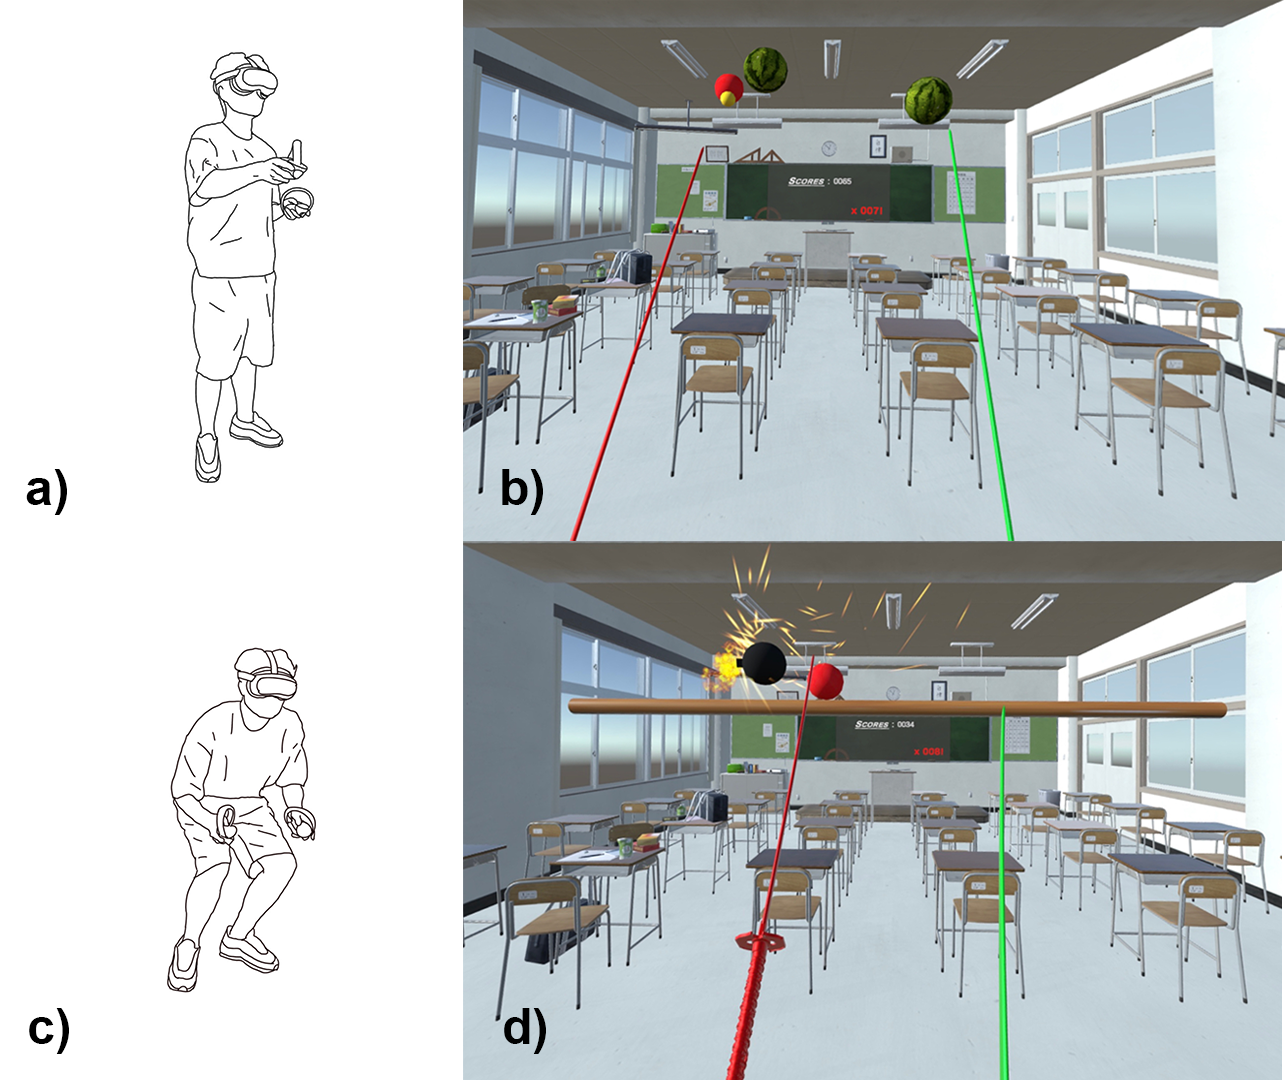 The left side of this figure shows a men playing the game in standing posture and squatting posture, the right hand side shows both corresponding gaming environment in a classroom with fruits poping up in the air.